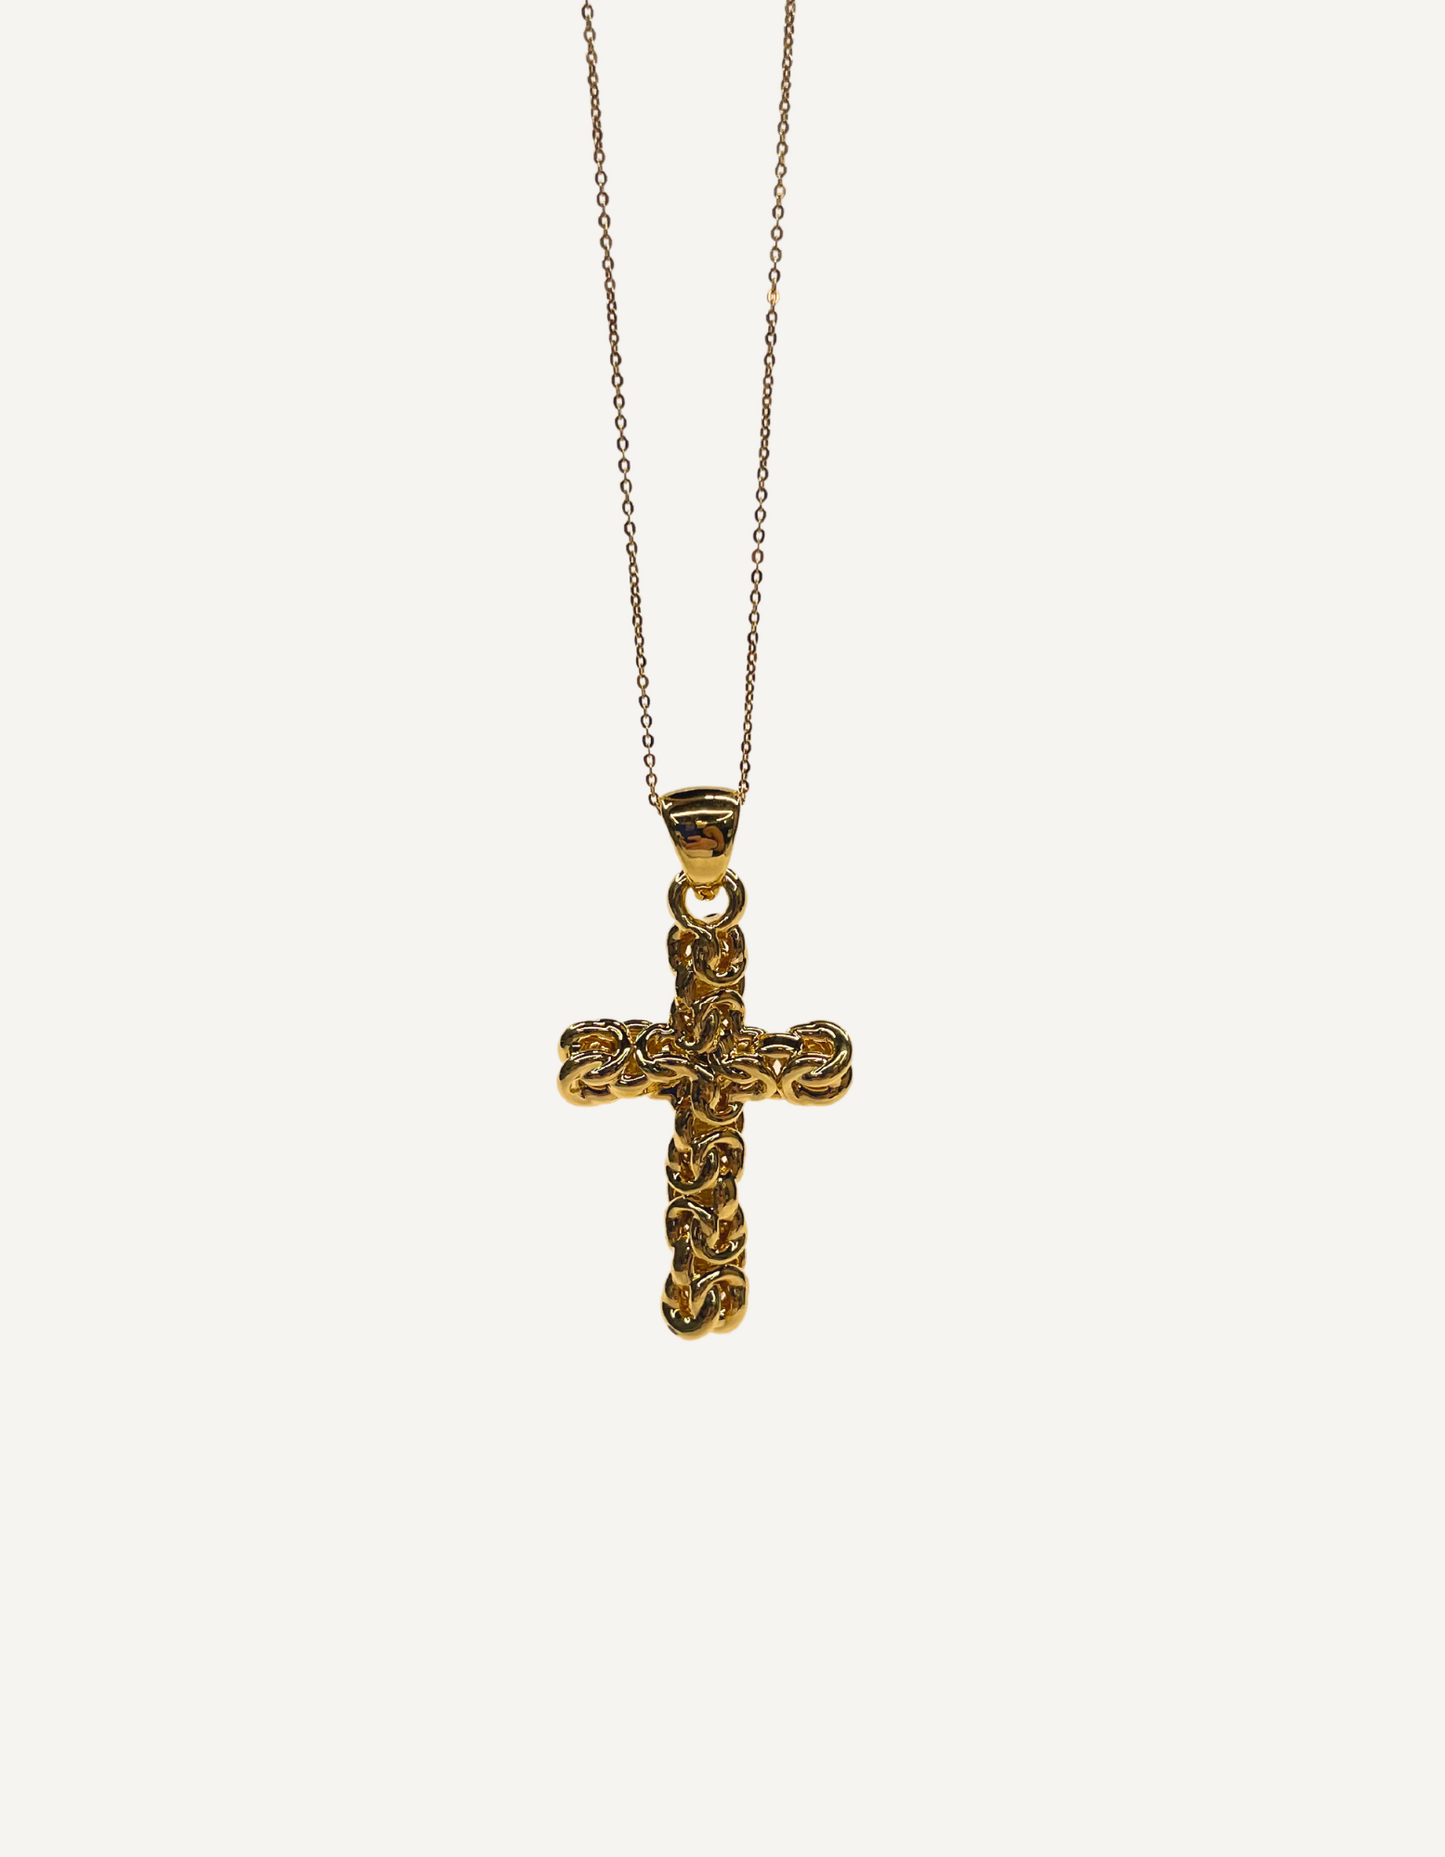 14K Gold Cross Pendant with Chain